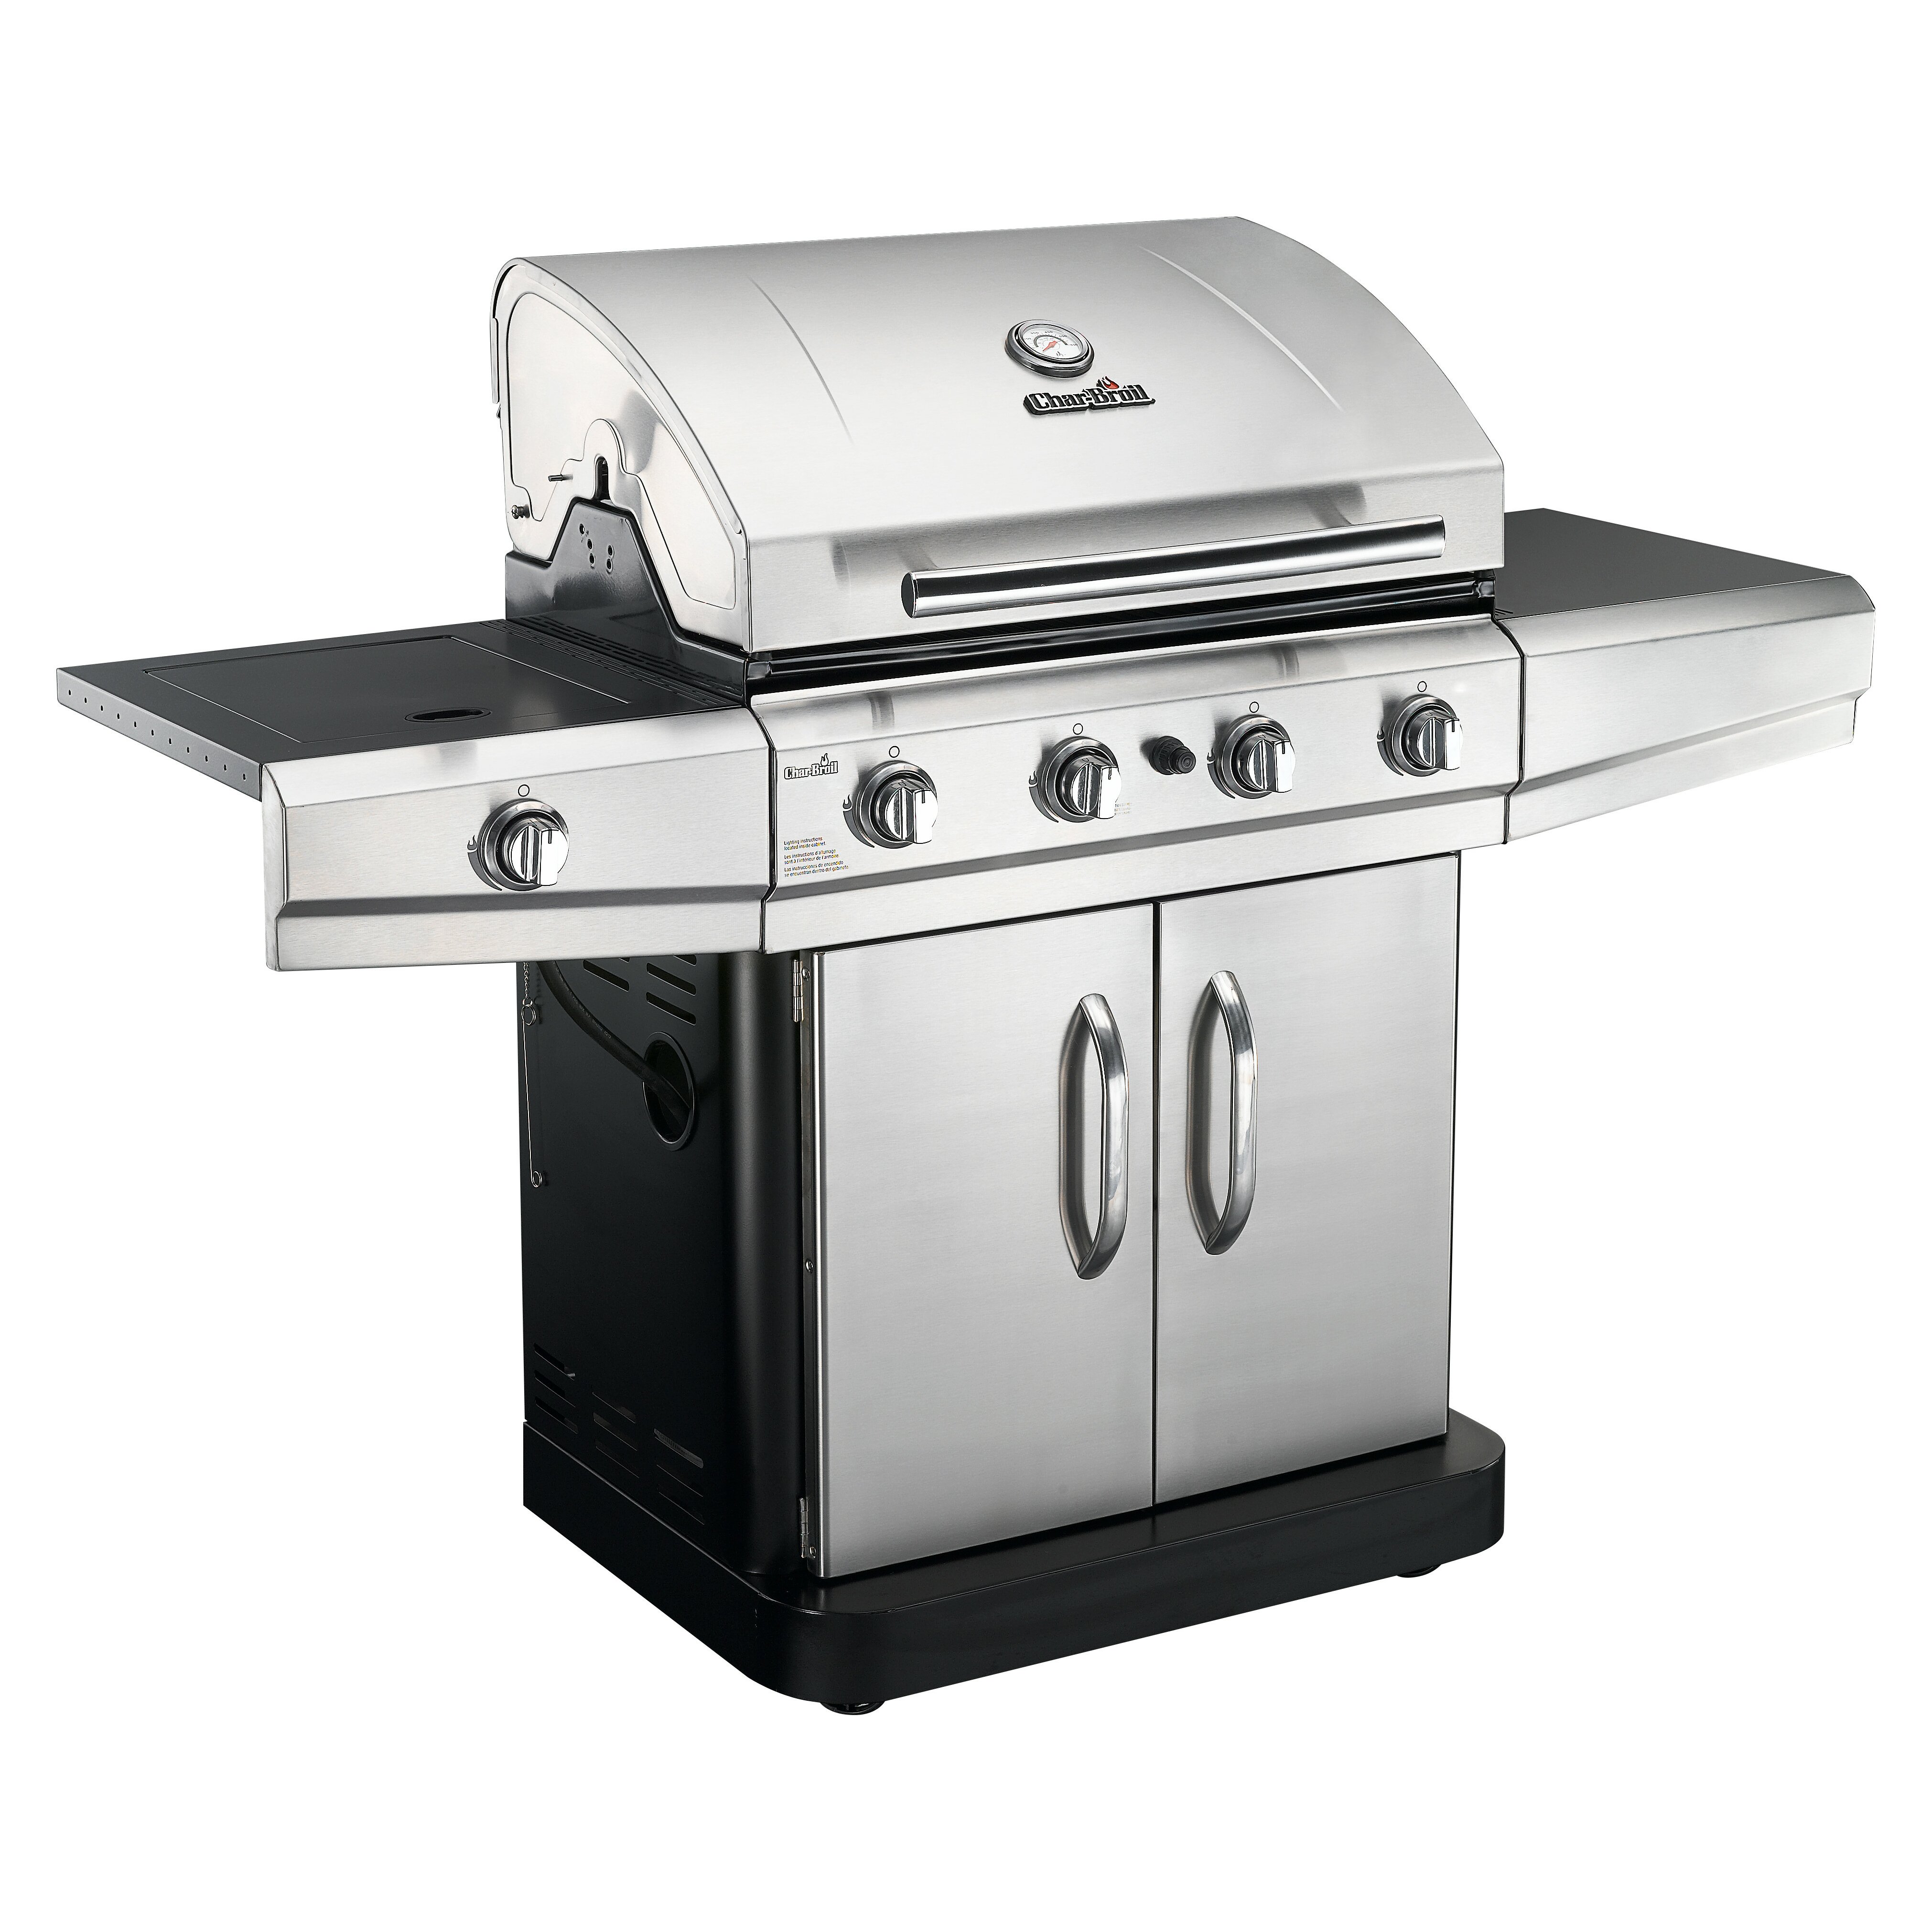 CharBroil Classic 4 Burner Gas Grill with Side Burner \u0026amp; Reviews ...